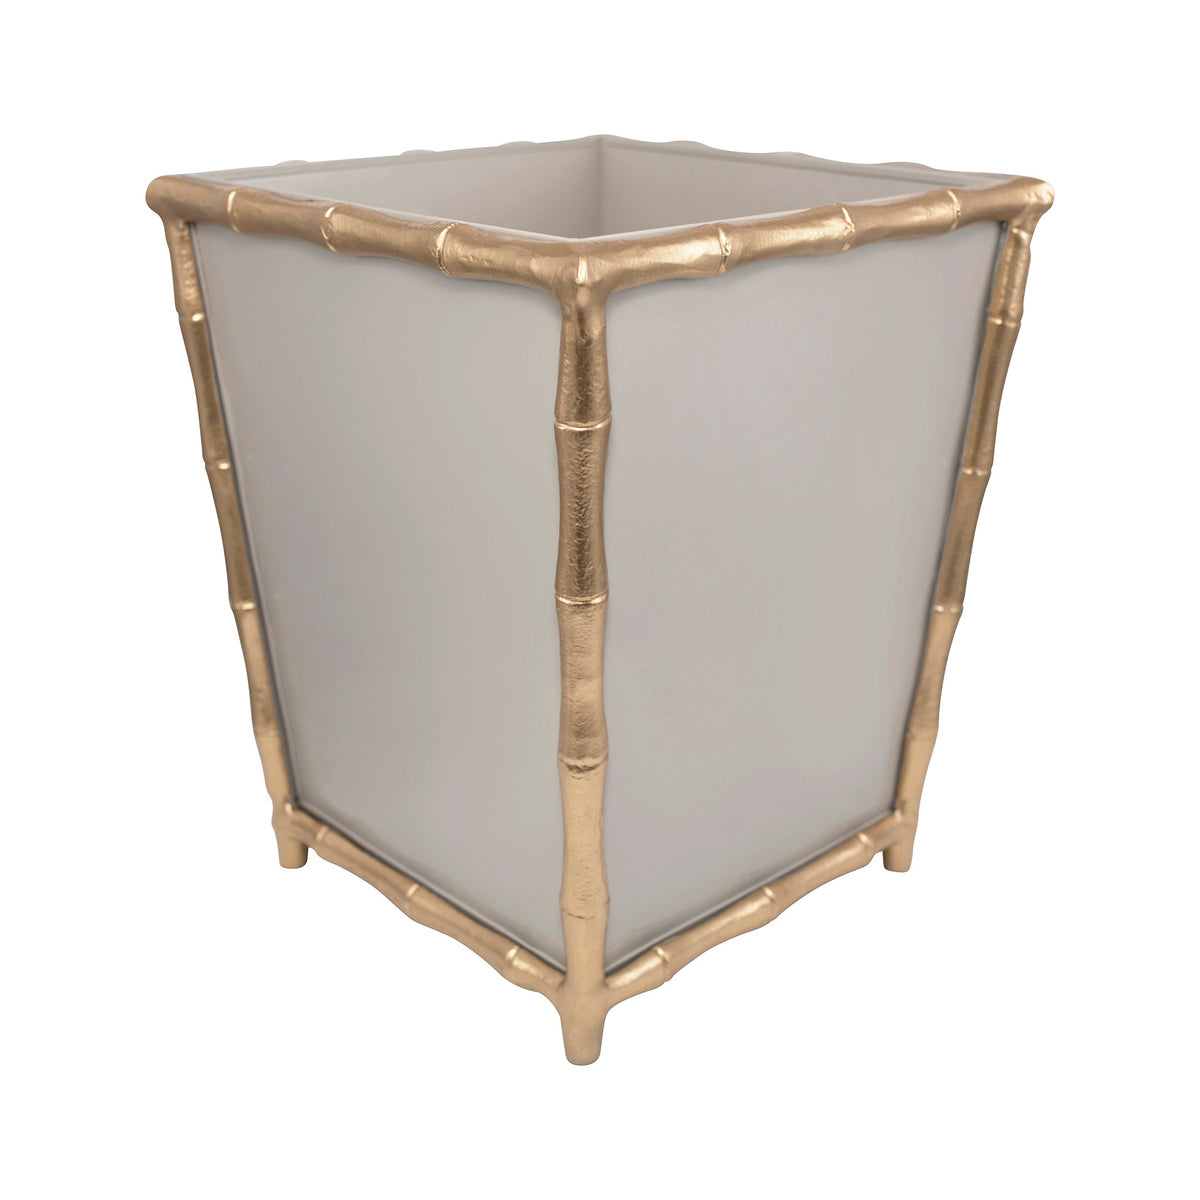 Mattie Chang Mai Square Wastebasket Taupe - Avail 5/15